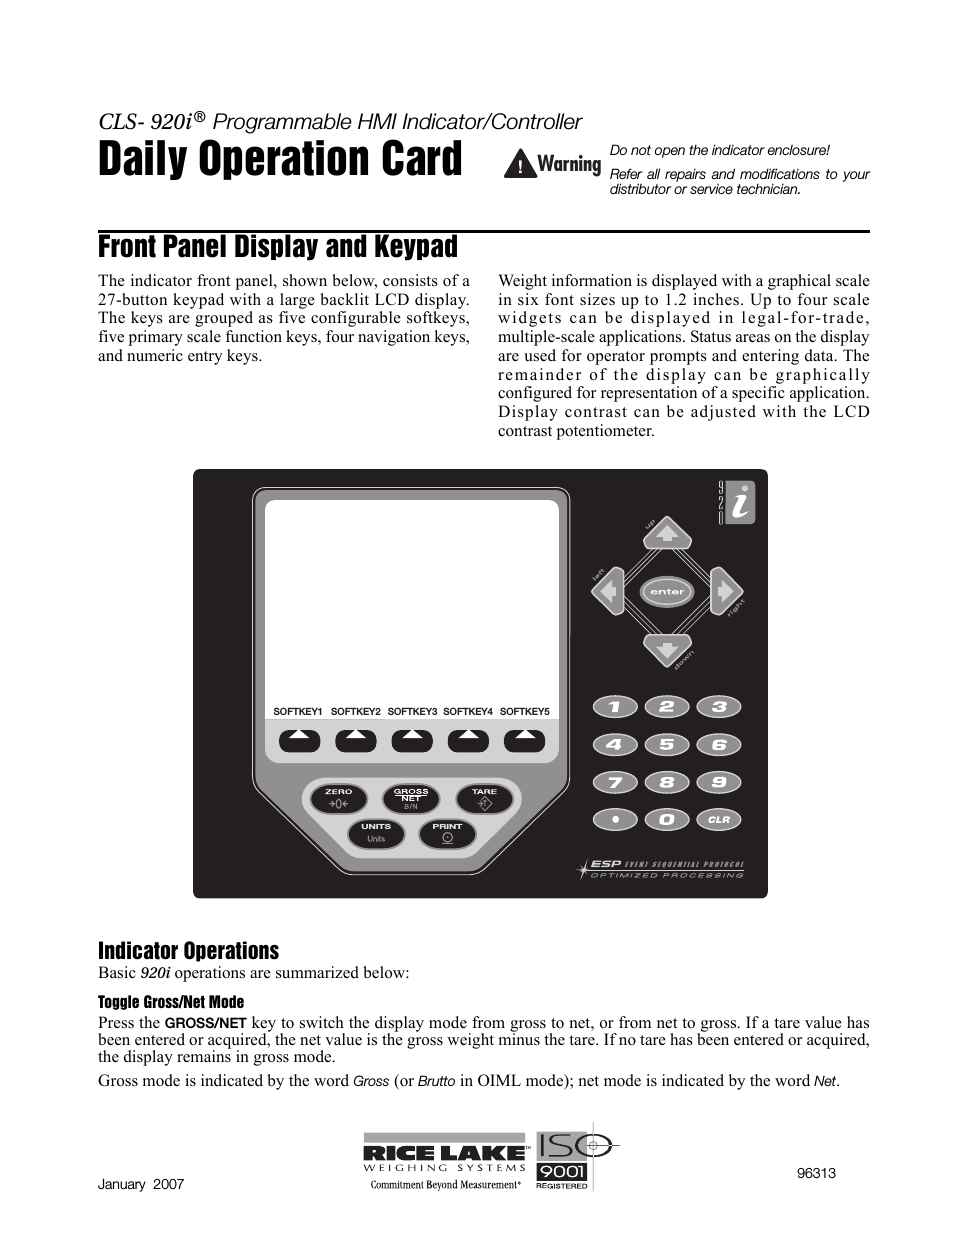 CLS-920i Cargo Lift Scale Daily Operator Card